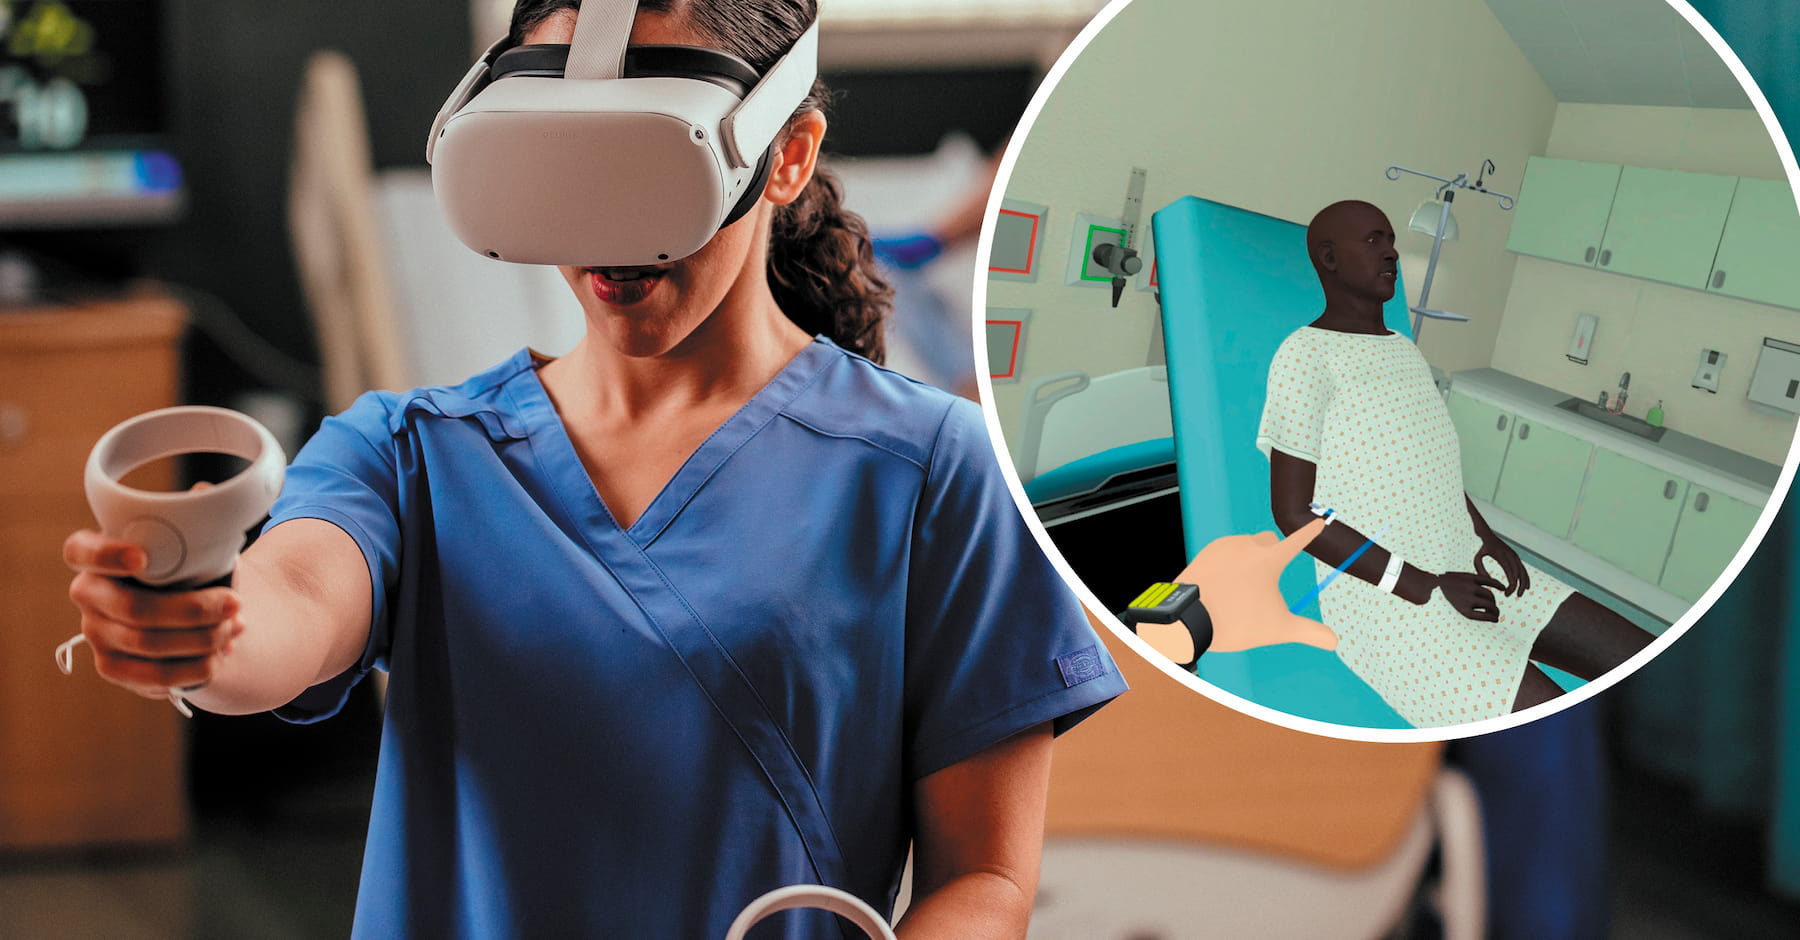 virtual reality in medical field research paper